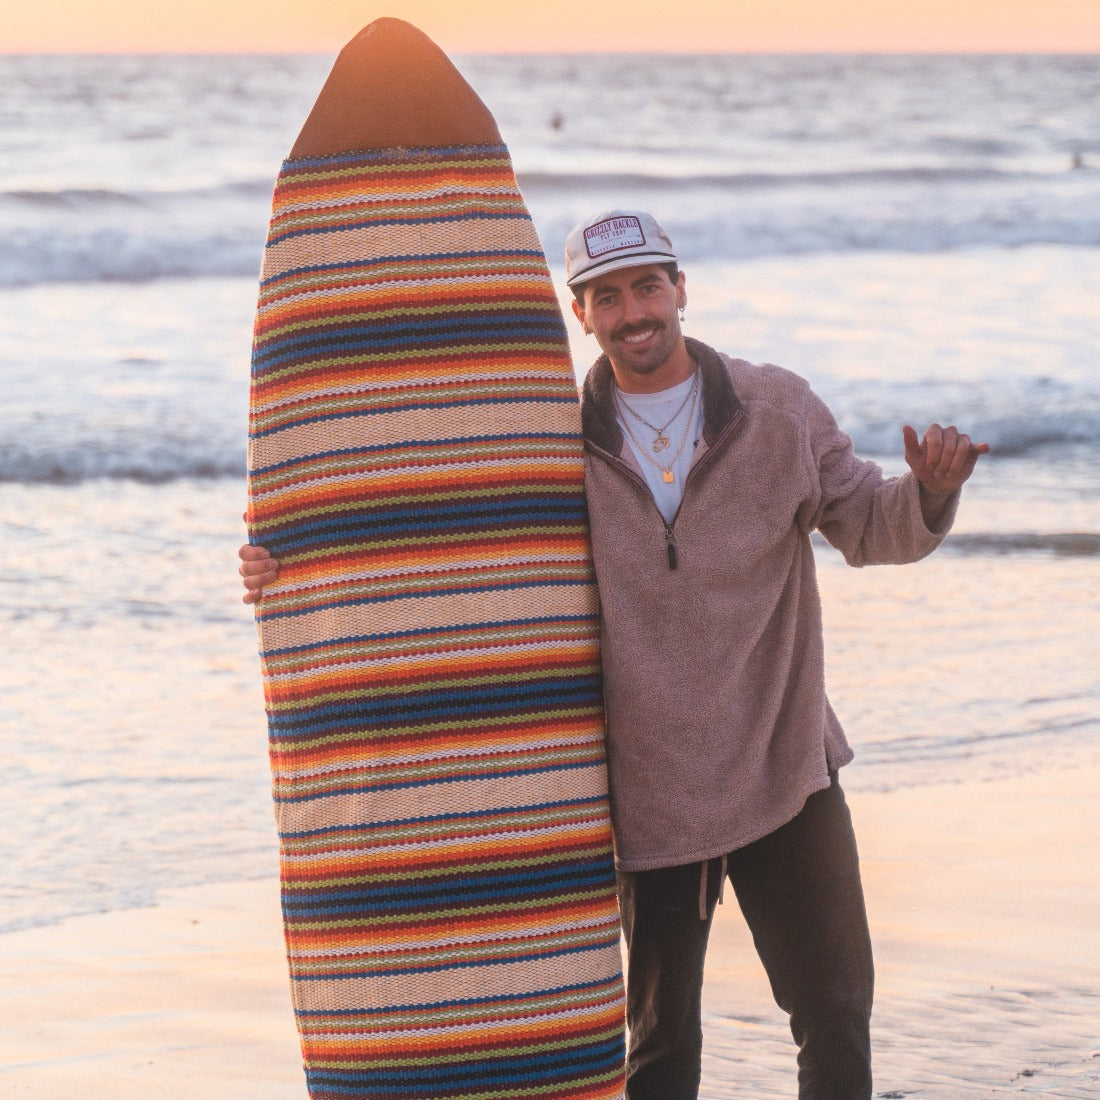 Surfboard Day Bag - Extra Thick | Cabo Stripes - 6'0" - 10'0"